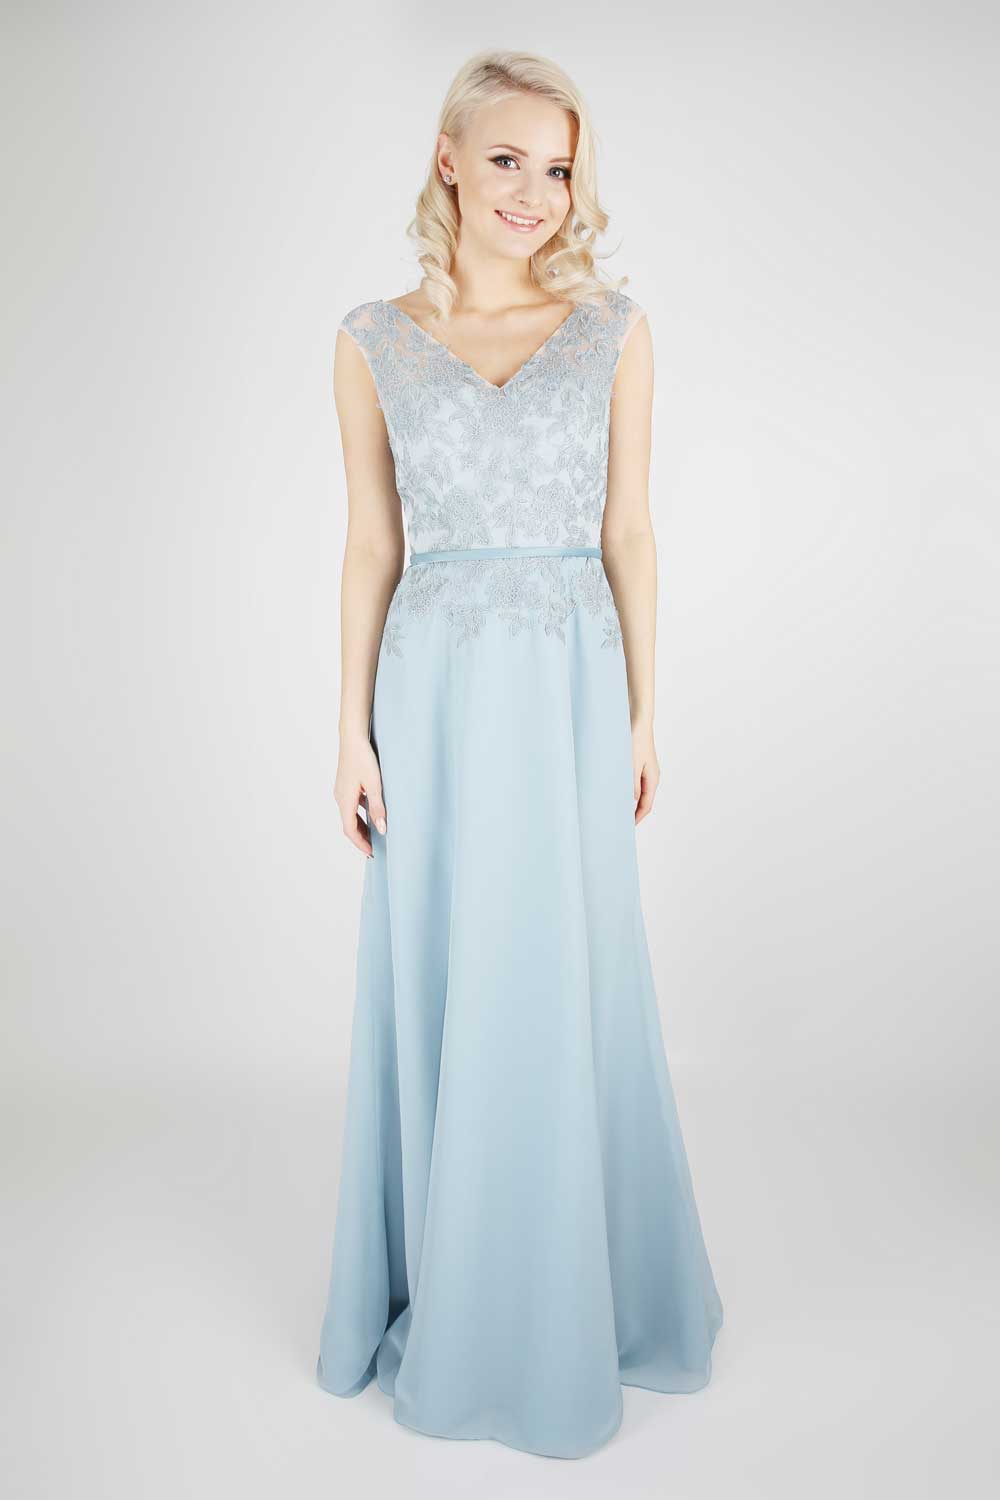 Bridesmaid gown has a beautiful lace bodice